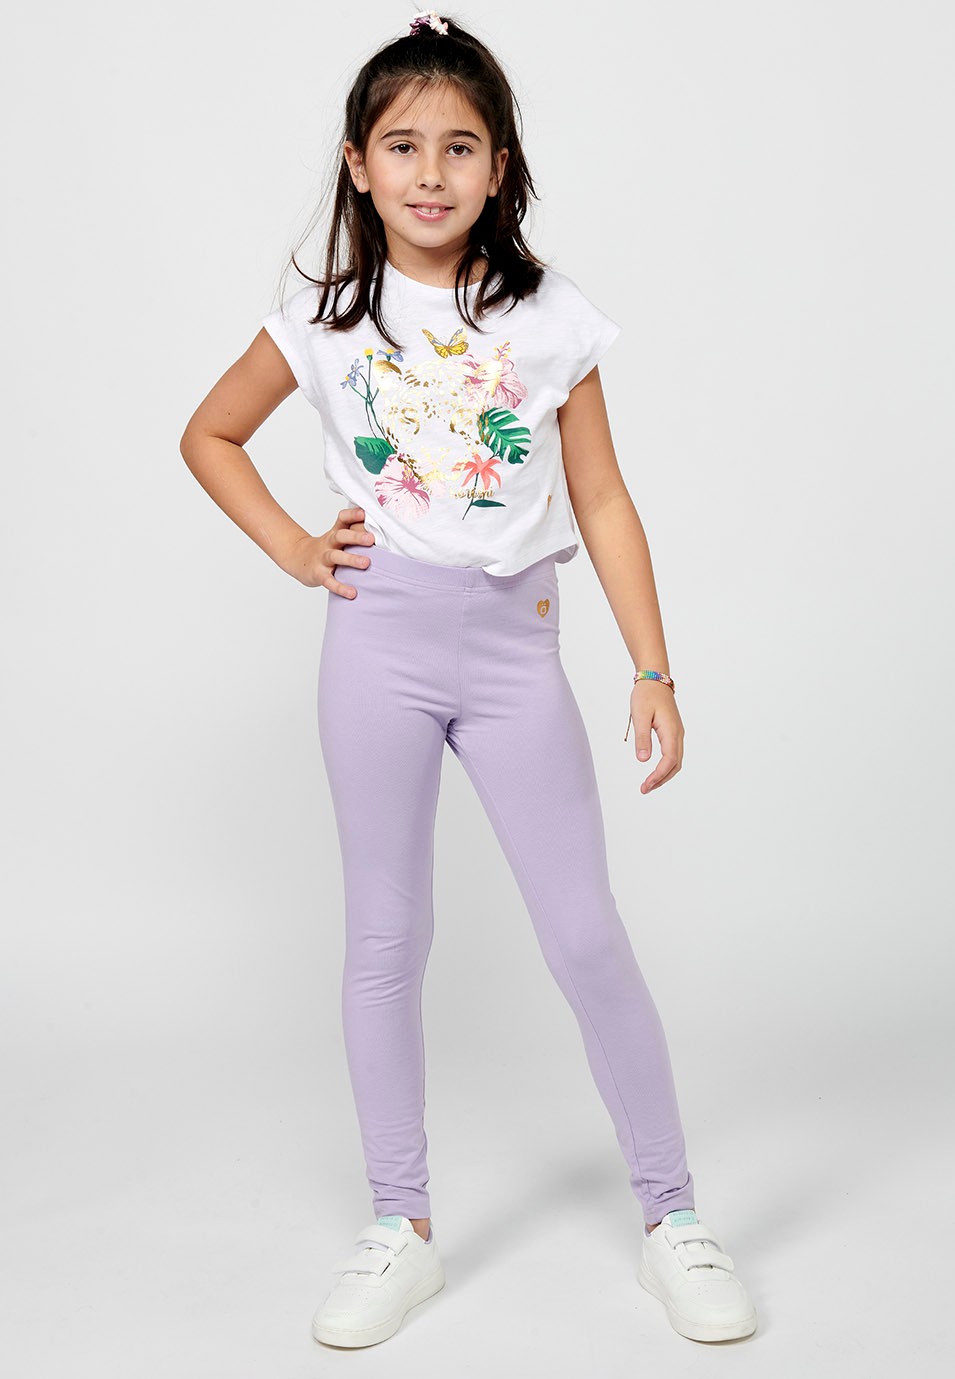 Pack of two long leggings, one of them with an animal print and elastic waistband in Multicolor for Girls